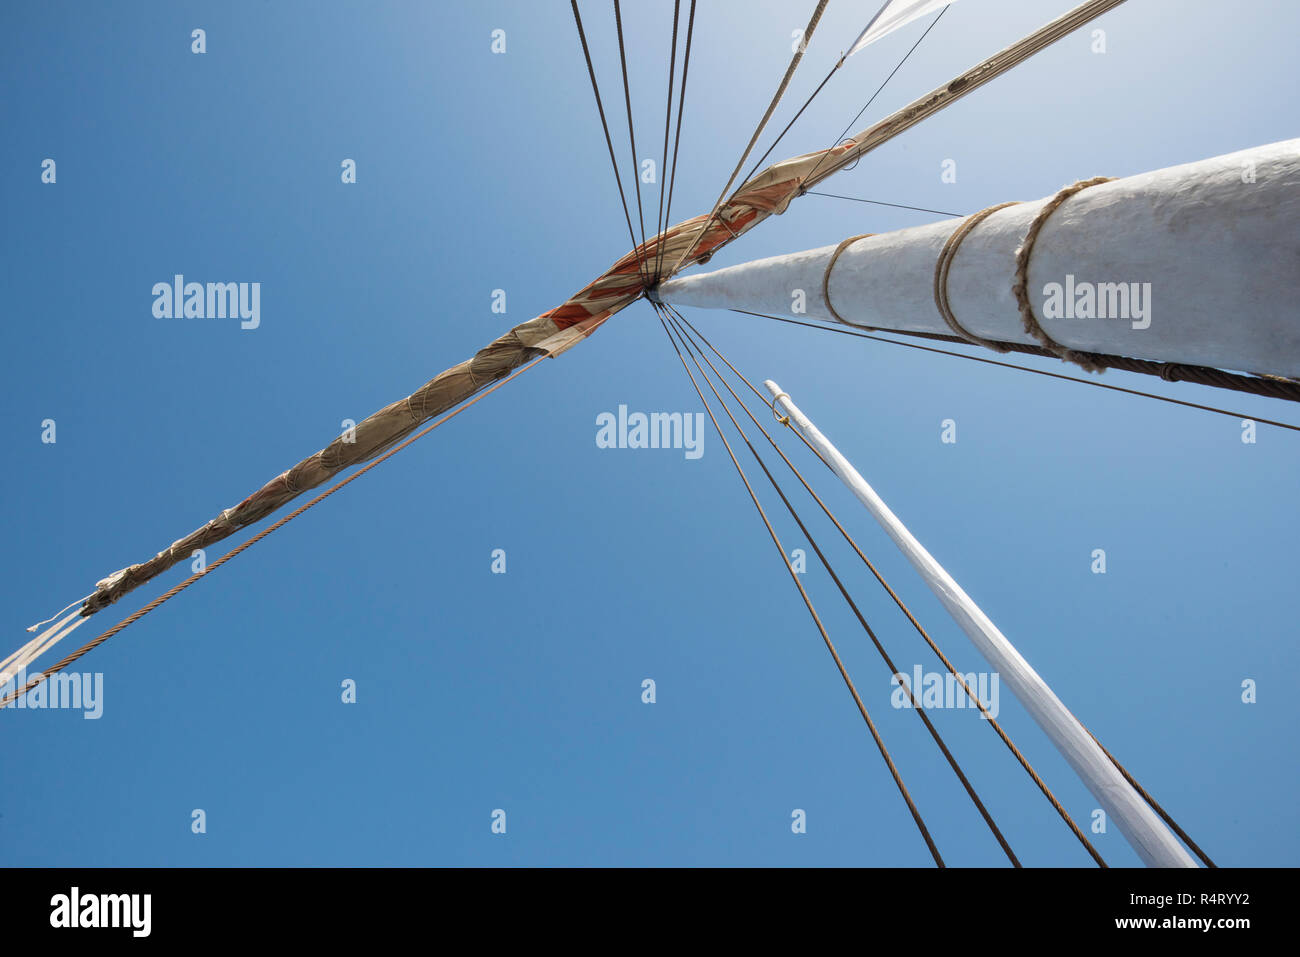 Abstract view of wooden sailing boat mast with rigging and blue sky background Stock Photo